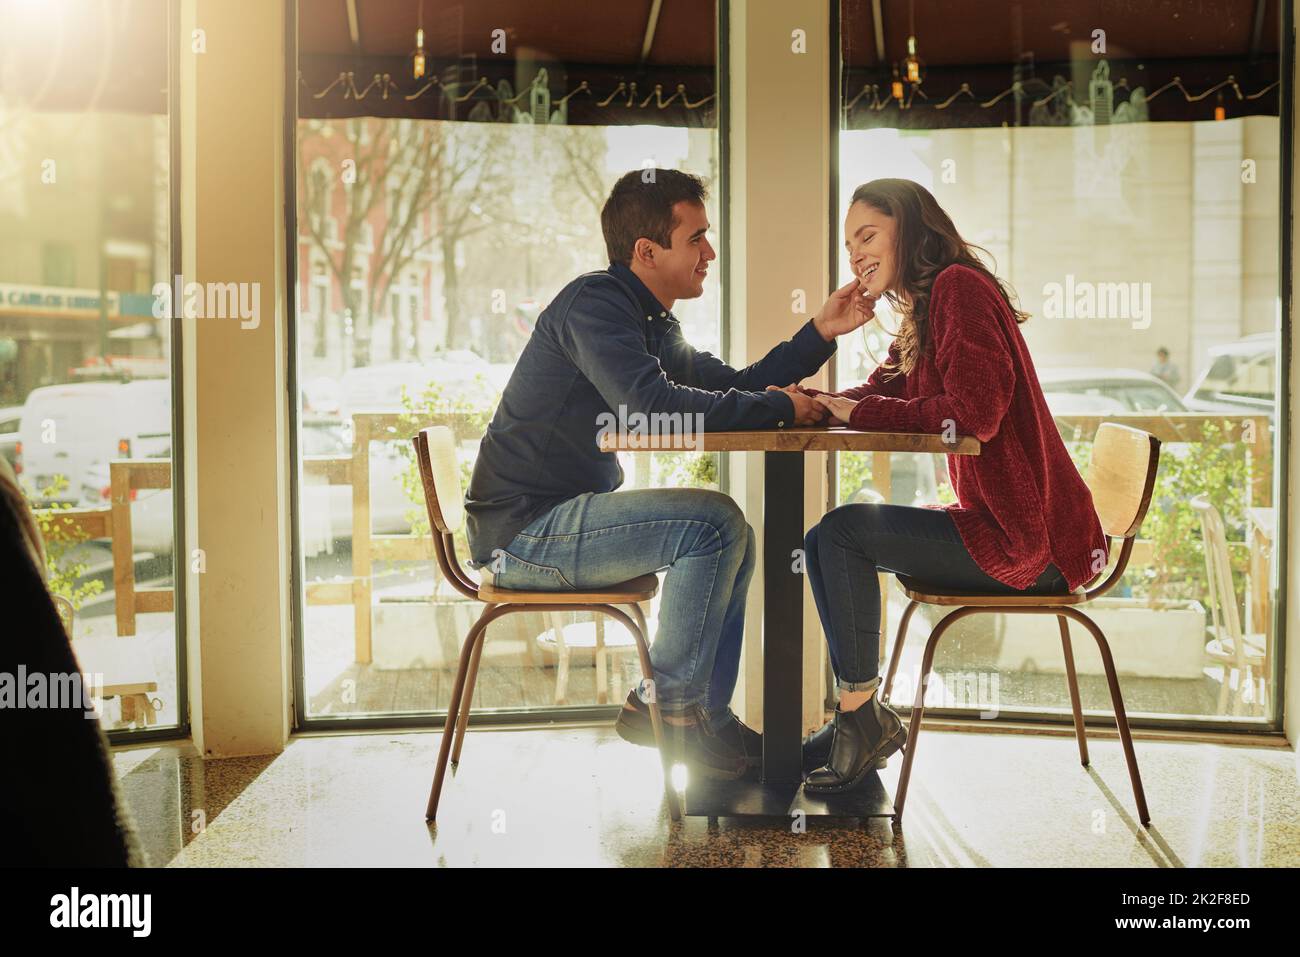 Theres always room for romance. Shot of a young man and woman on a romantic date at a coffee shop. Stock Photo